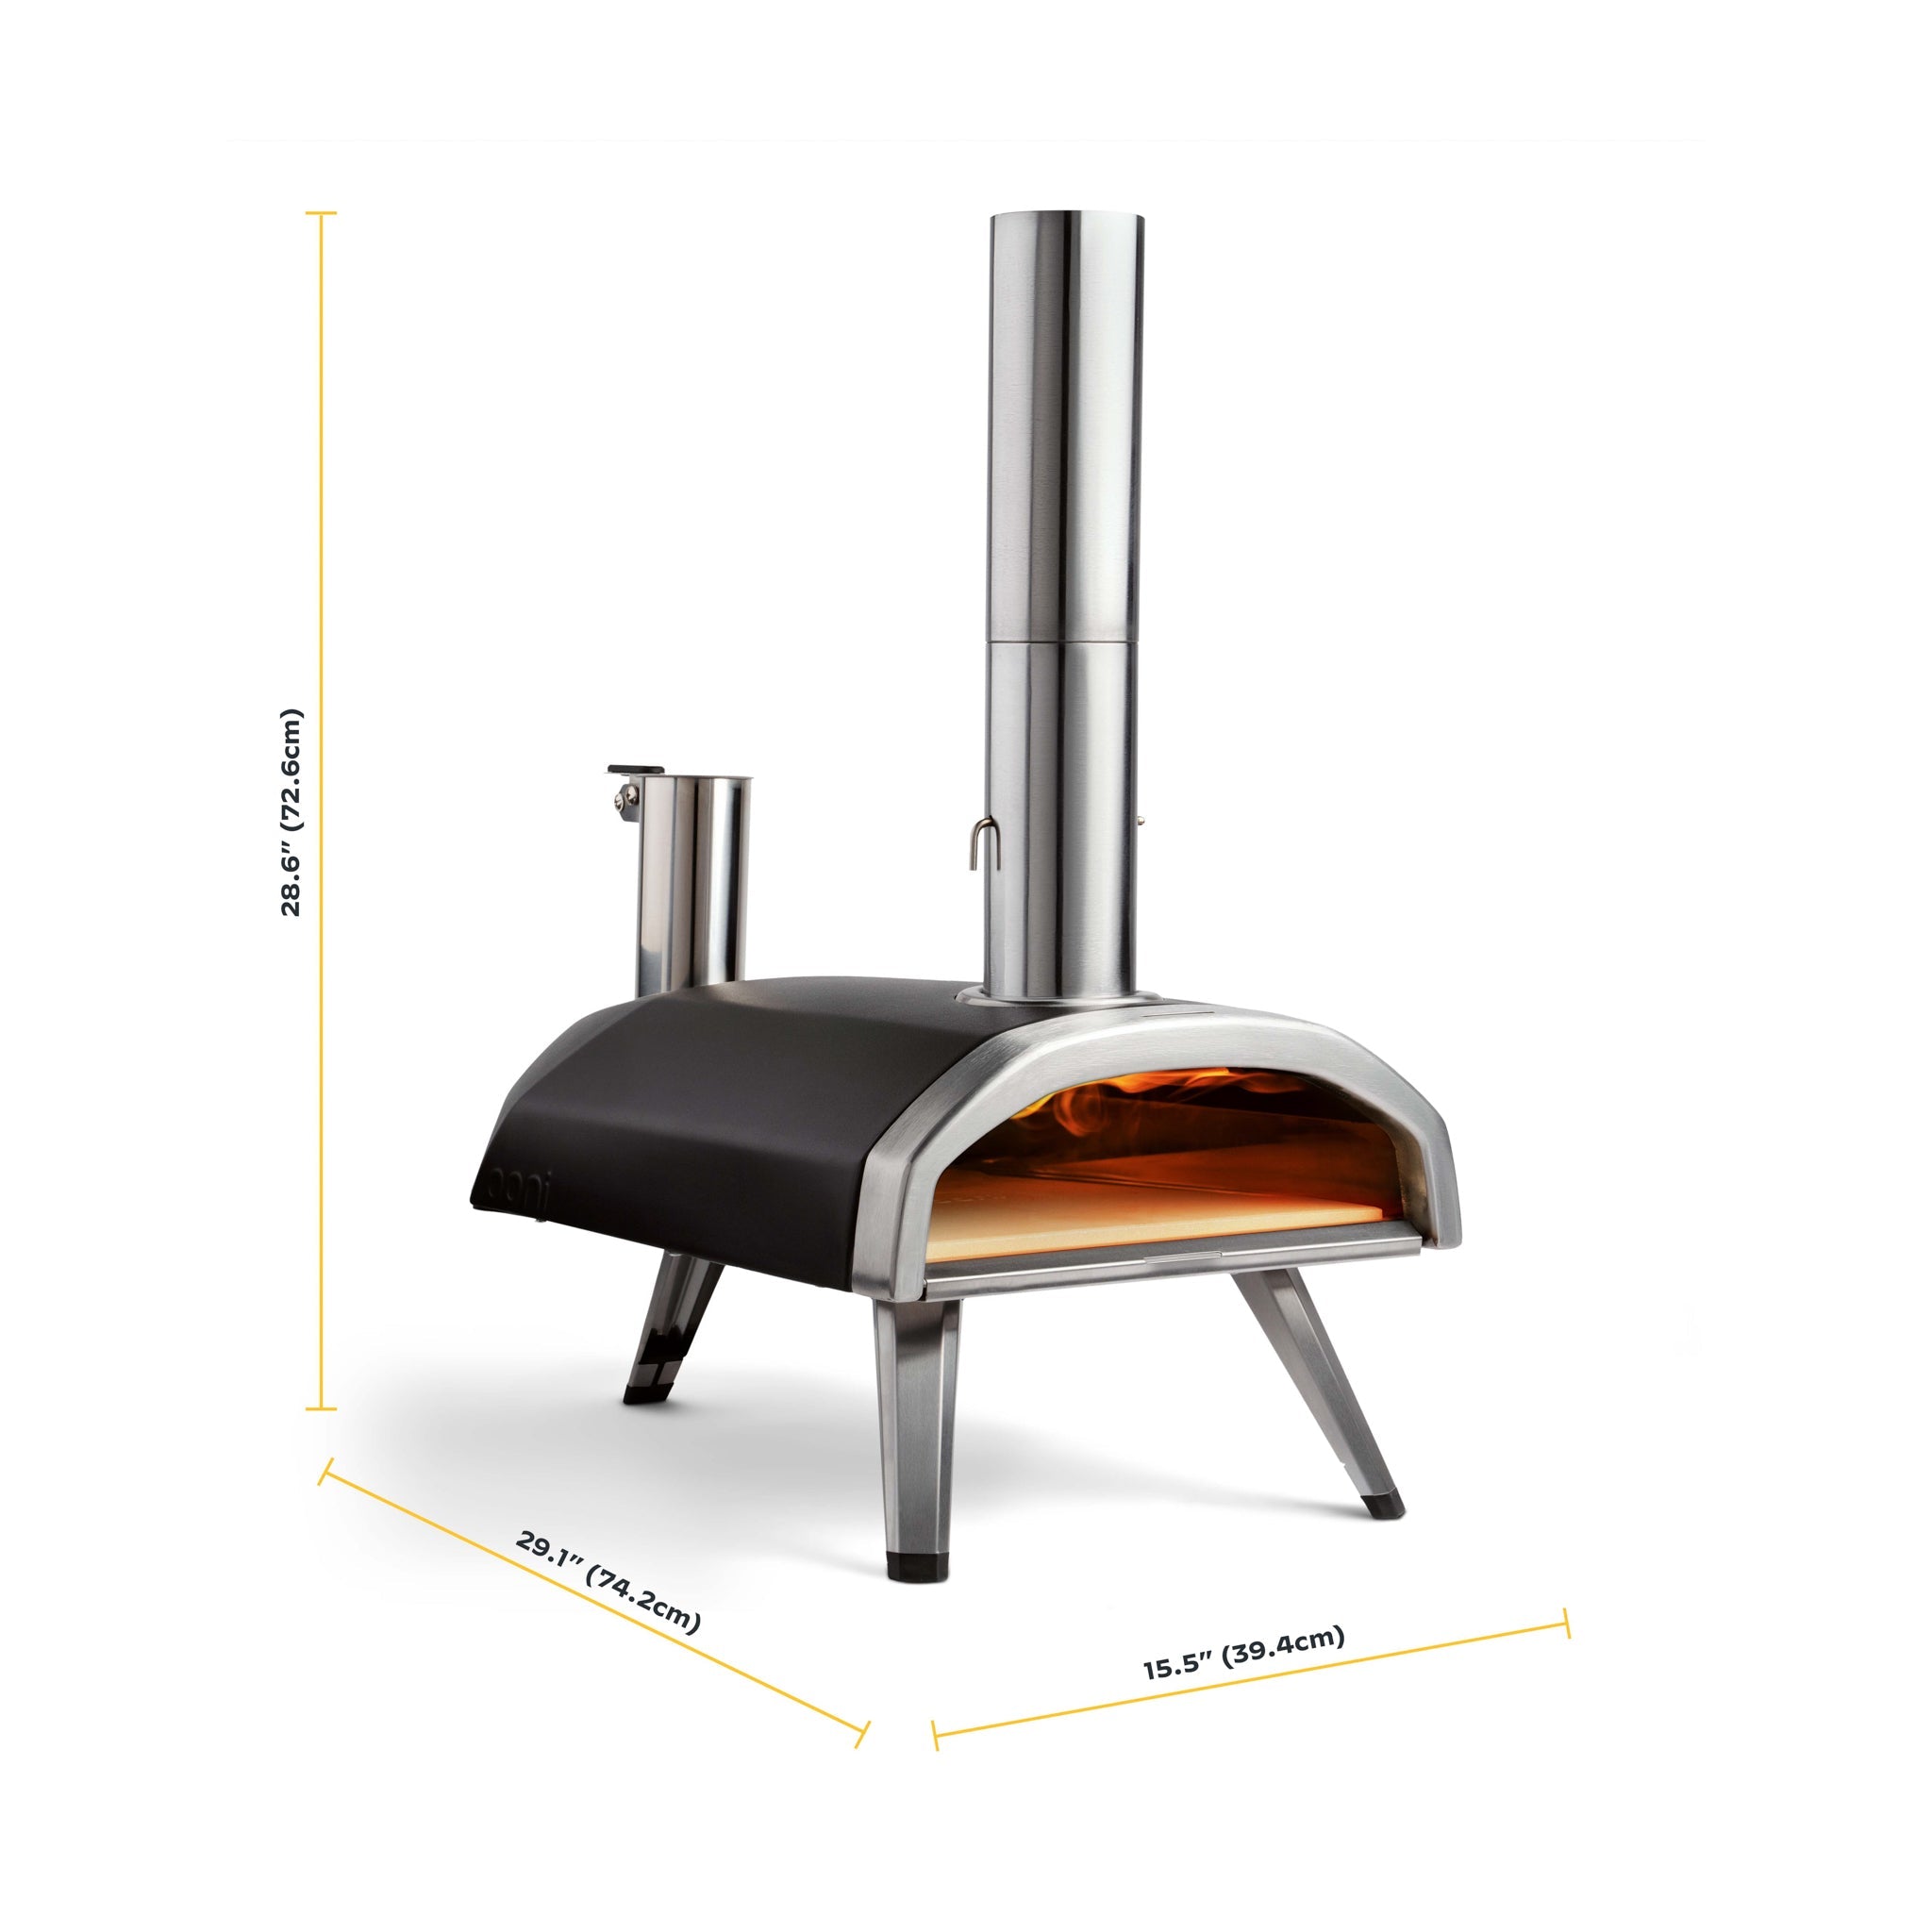 Ooni Fyra 12 Pizza Oven Dimensions